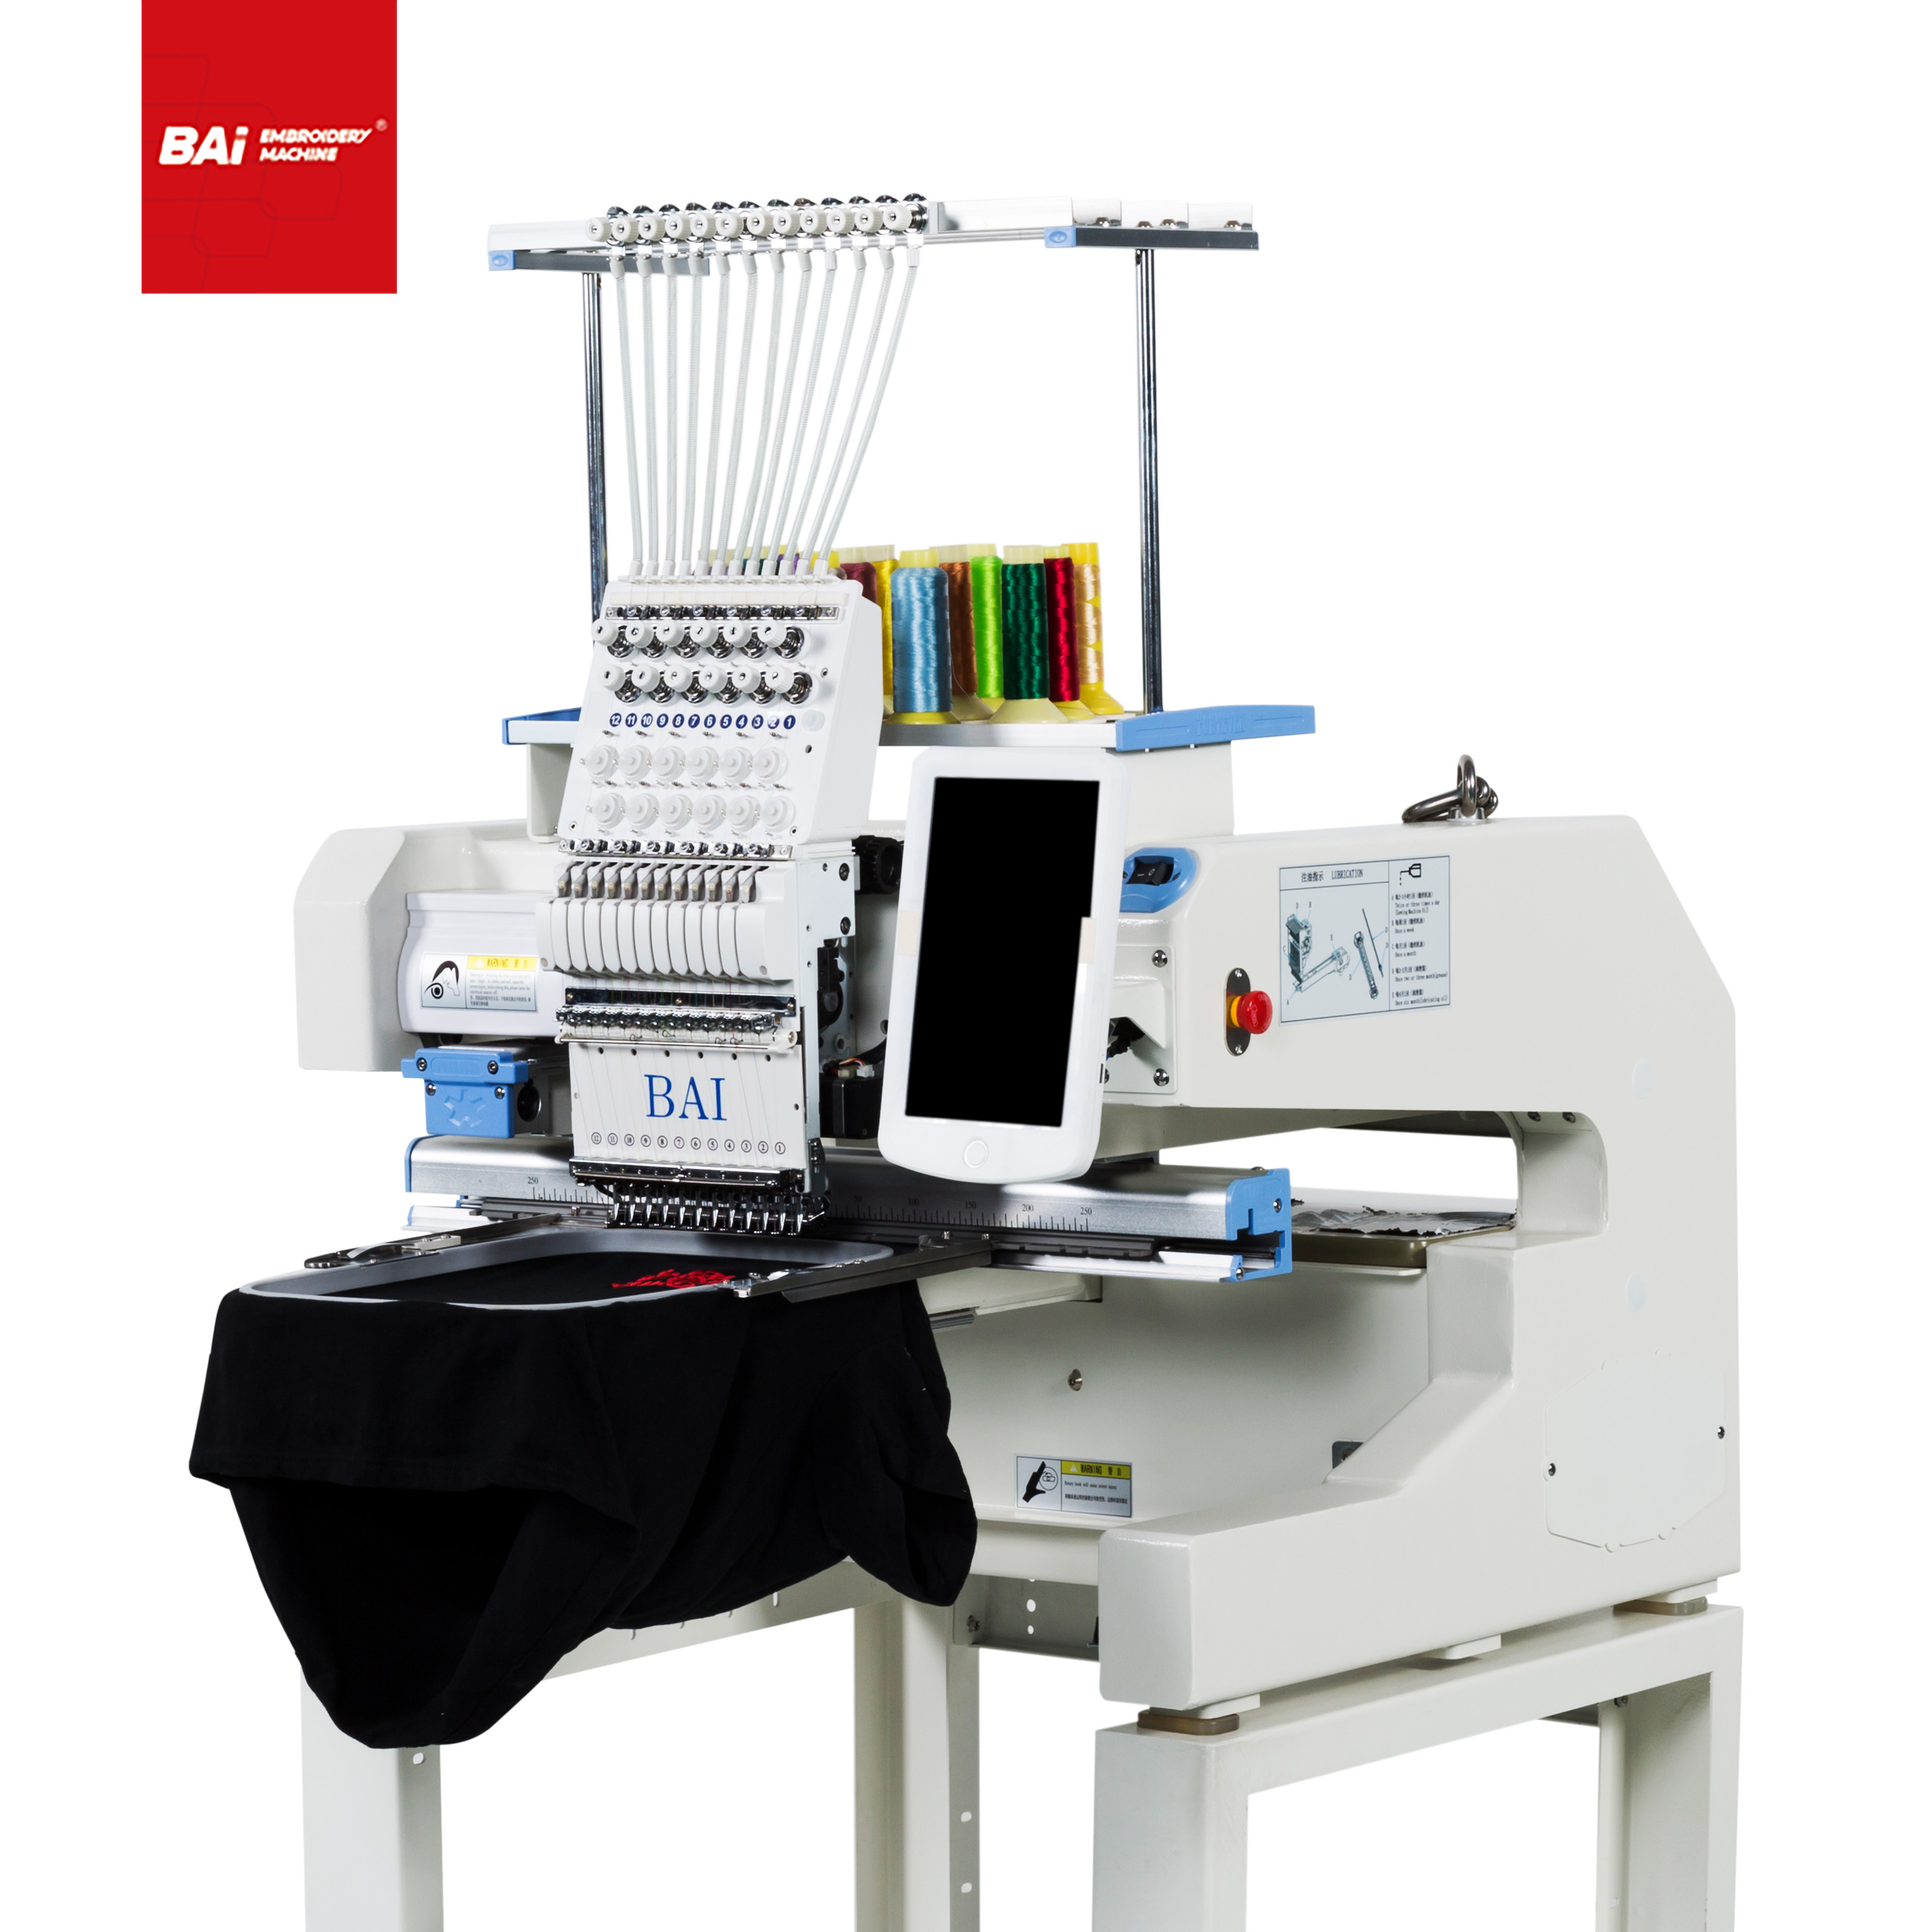 BAI Multi Function Embroidery Machine for Factory with Cap/tshirt